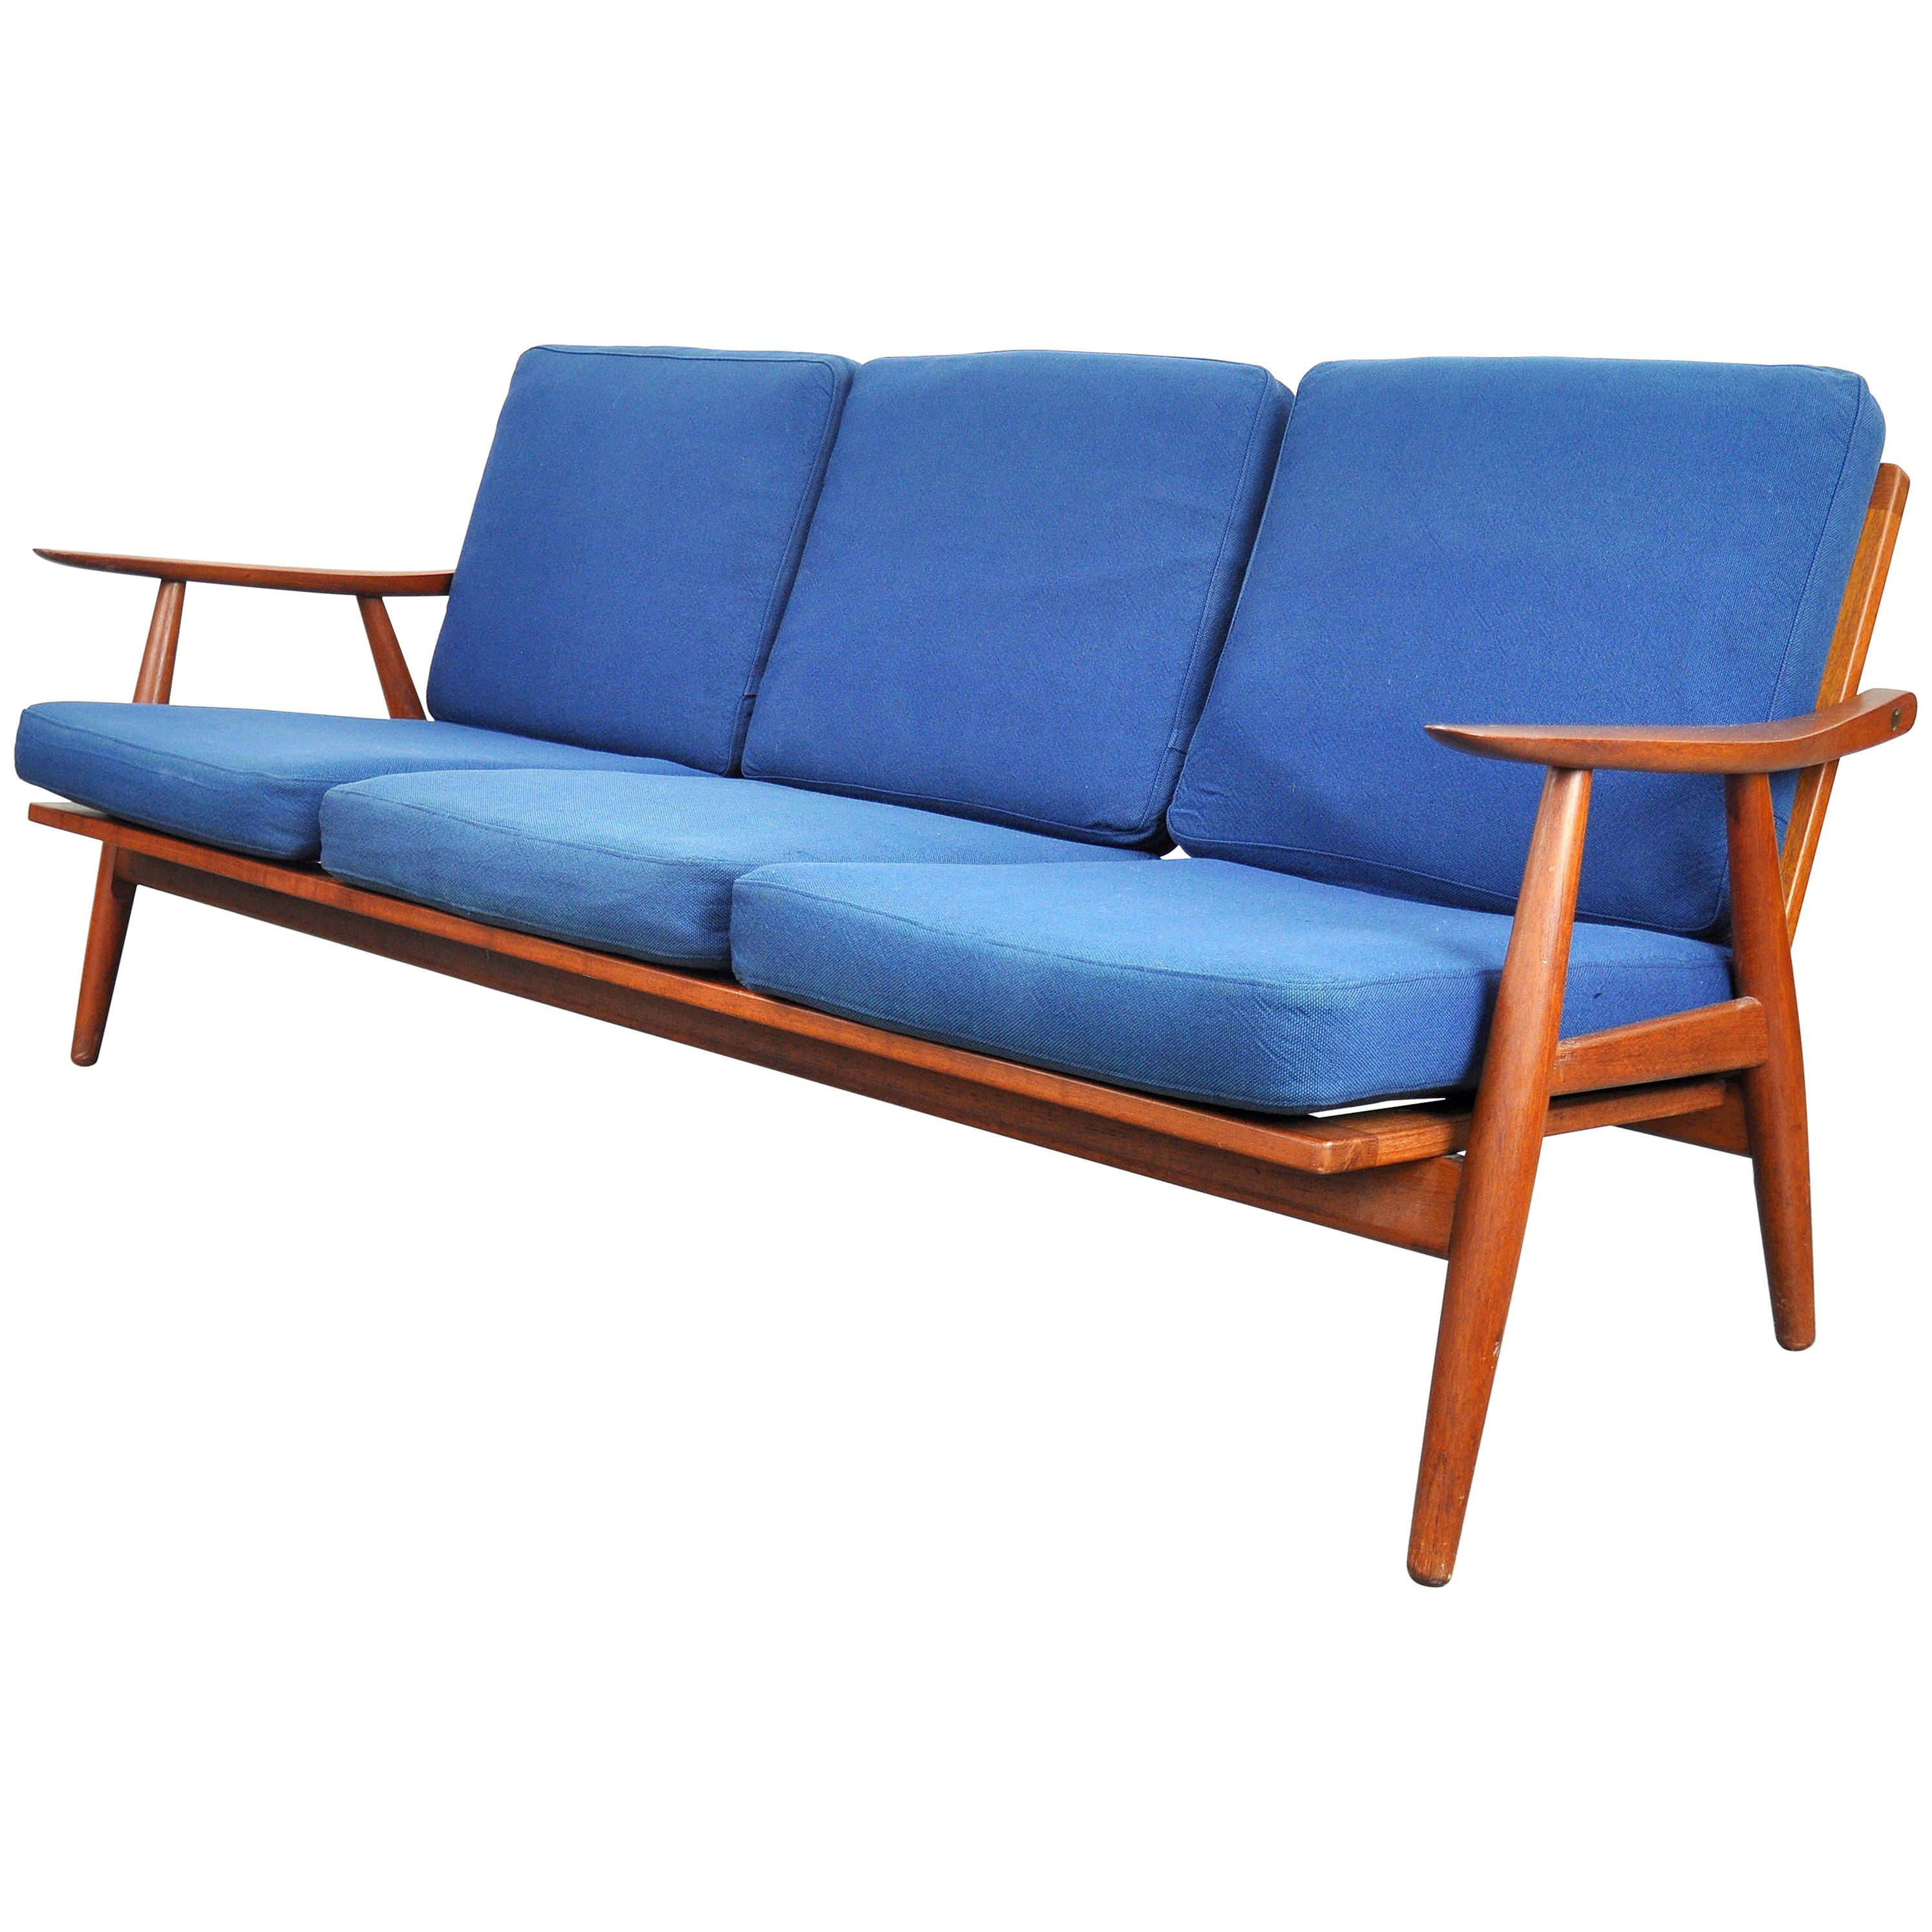 Vintage all original midcentury Danish modern three-seat teak couch, model GE-270, manufactured by GETAMA in Gedsted, Denmark in the 1950s, designed by Hans J. Wegner. The solid teak frame has the original oiled finish and brass hardware. The